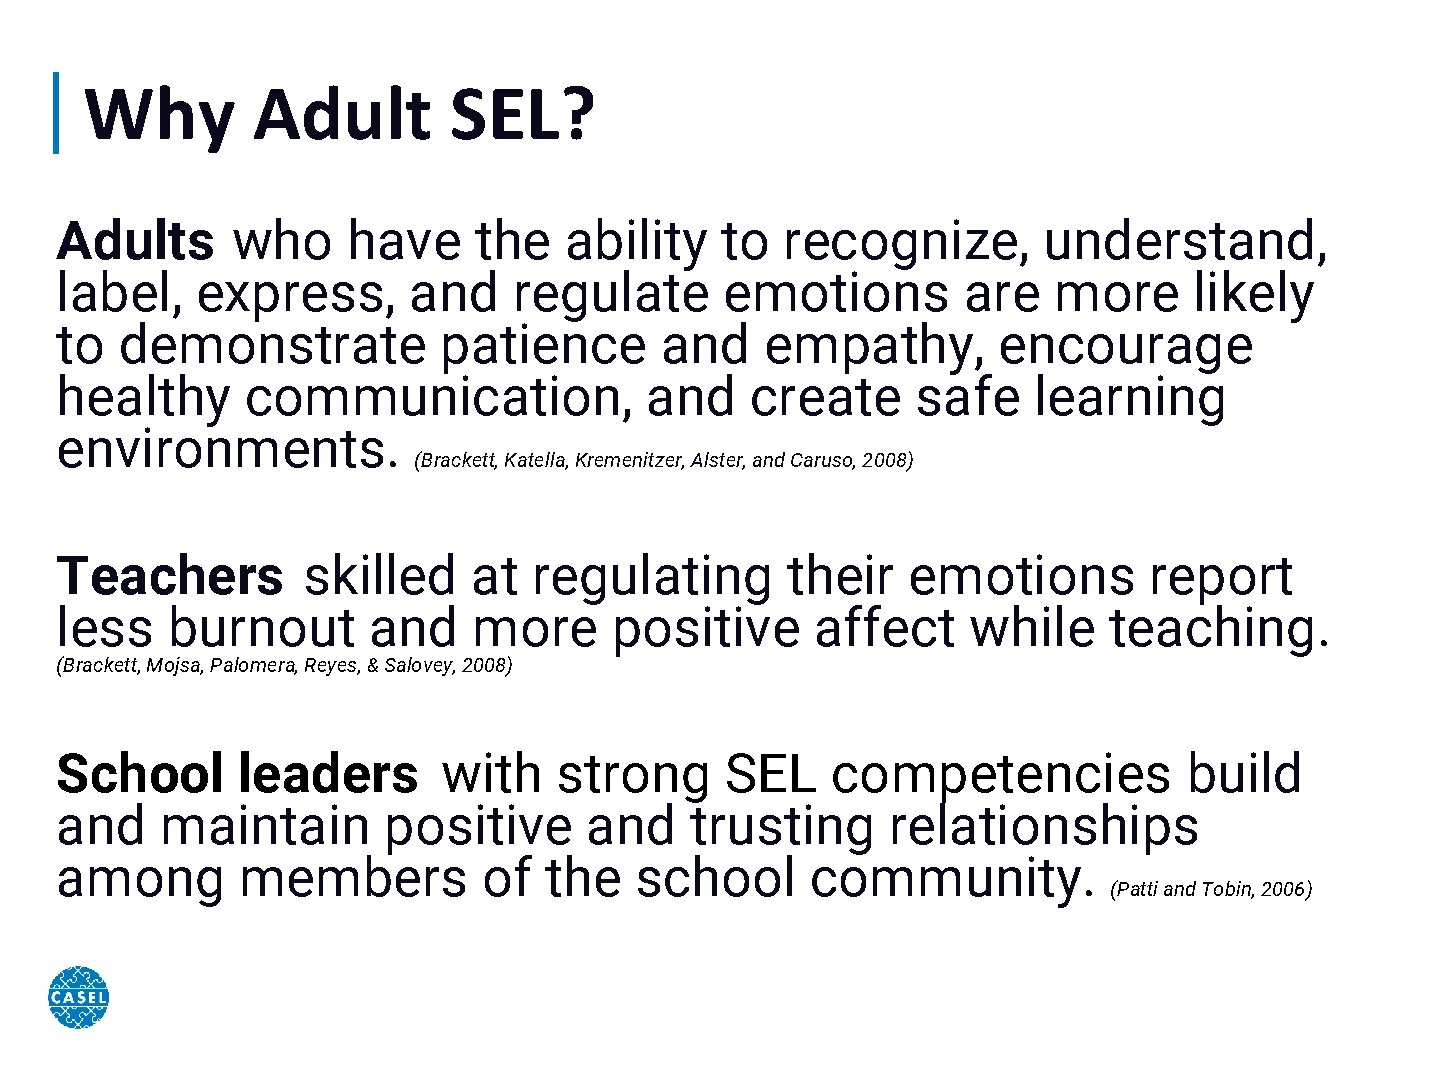 Why Adult SEL? Adults who have the ability to recognize, understand, label, express, and